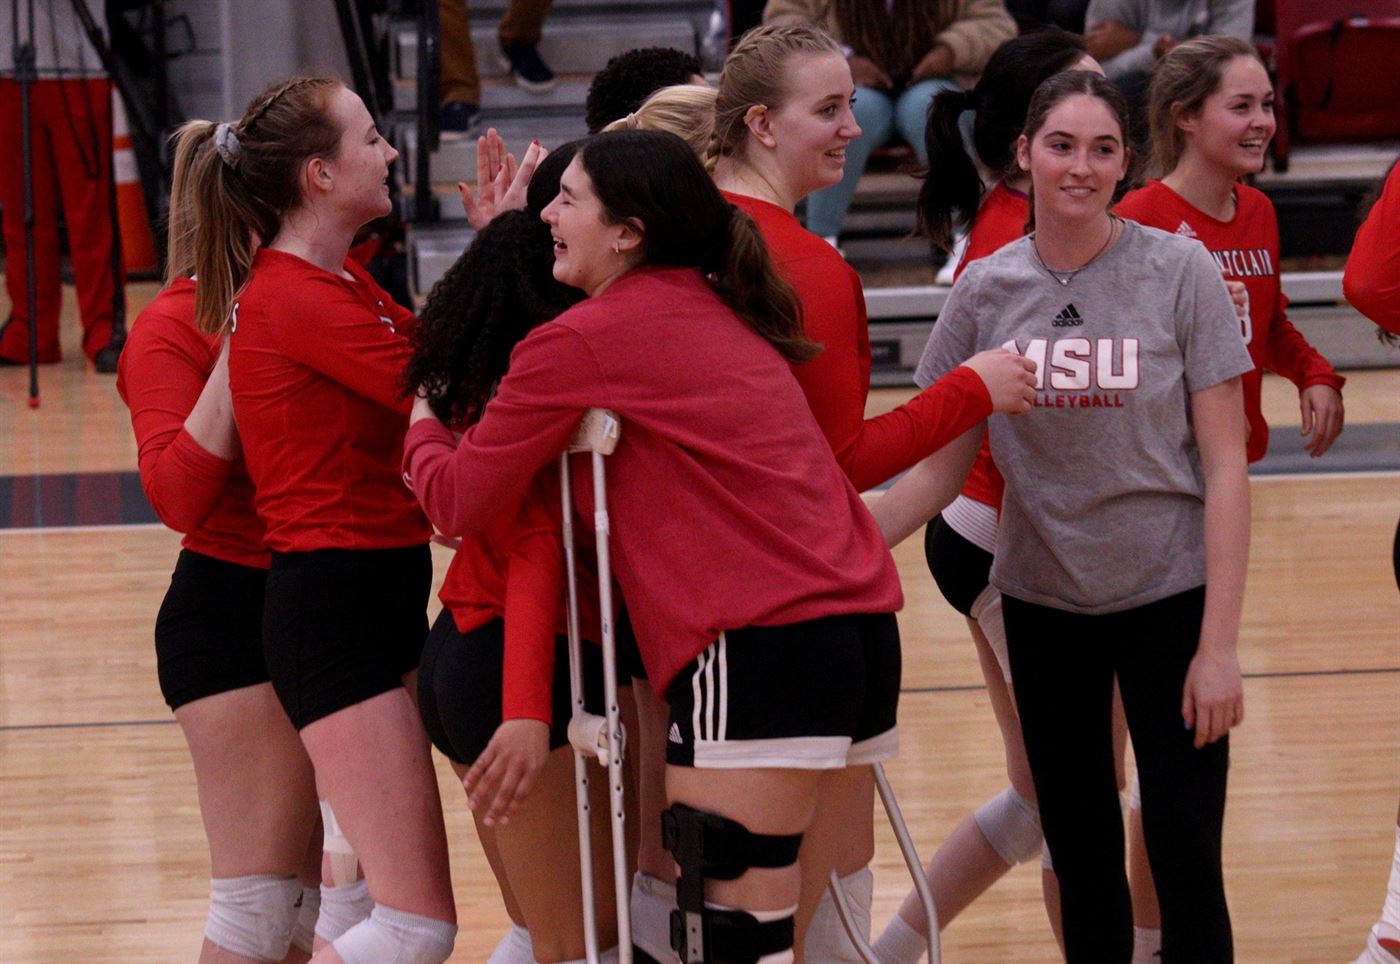 The Montclair State women's volleyball team celebrating their victory. John LaRosa | The Montclarion